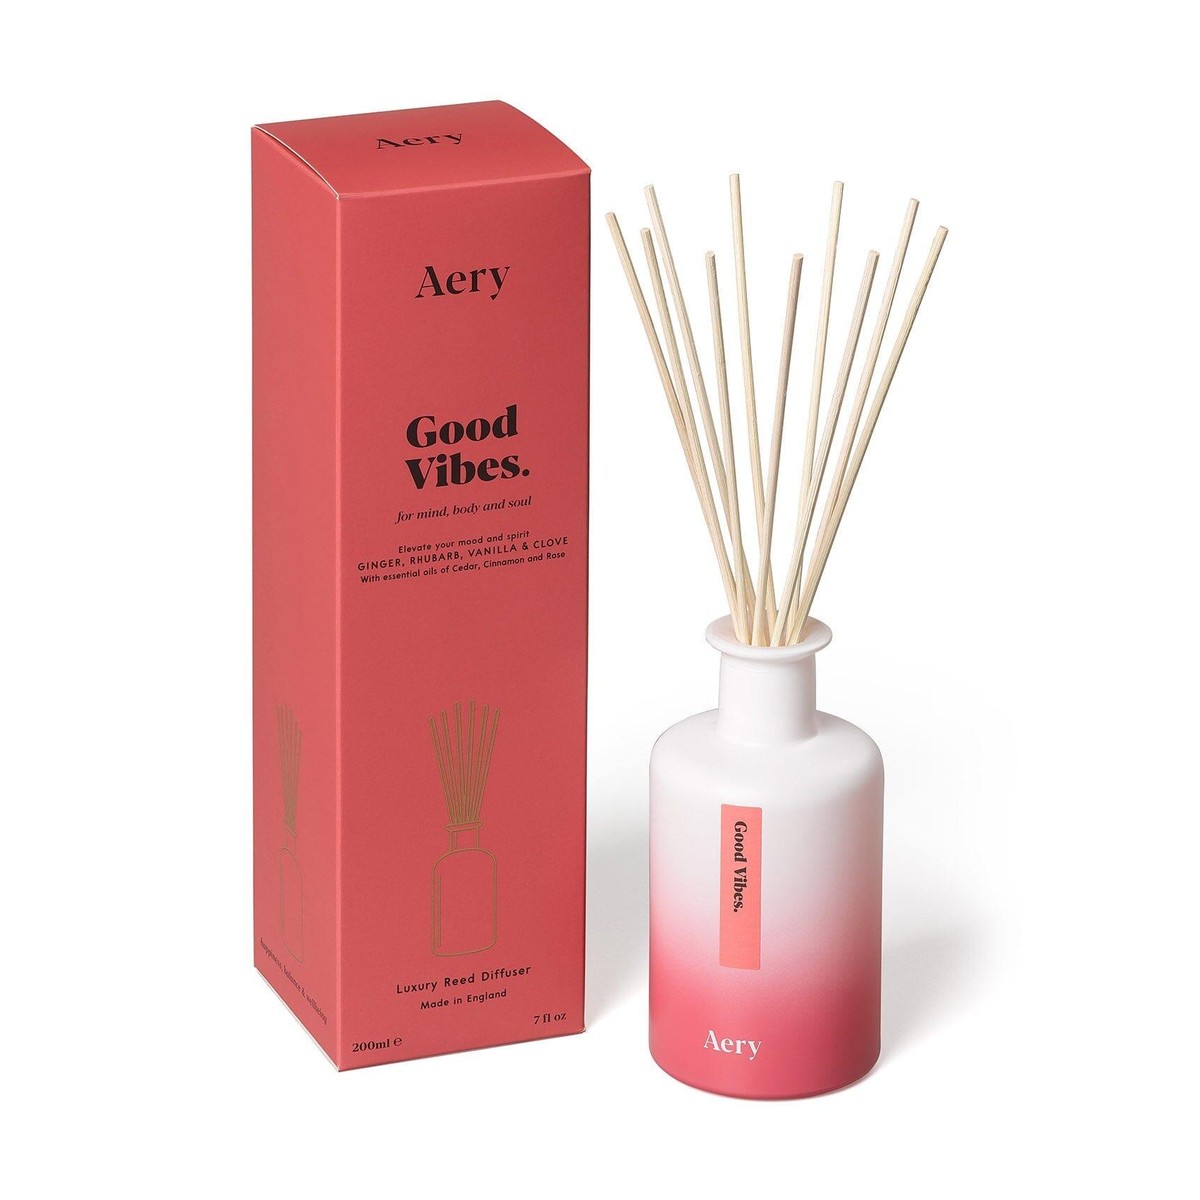  Aromatherapy Diffuseur Good Vibes  200ml